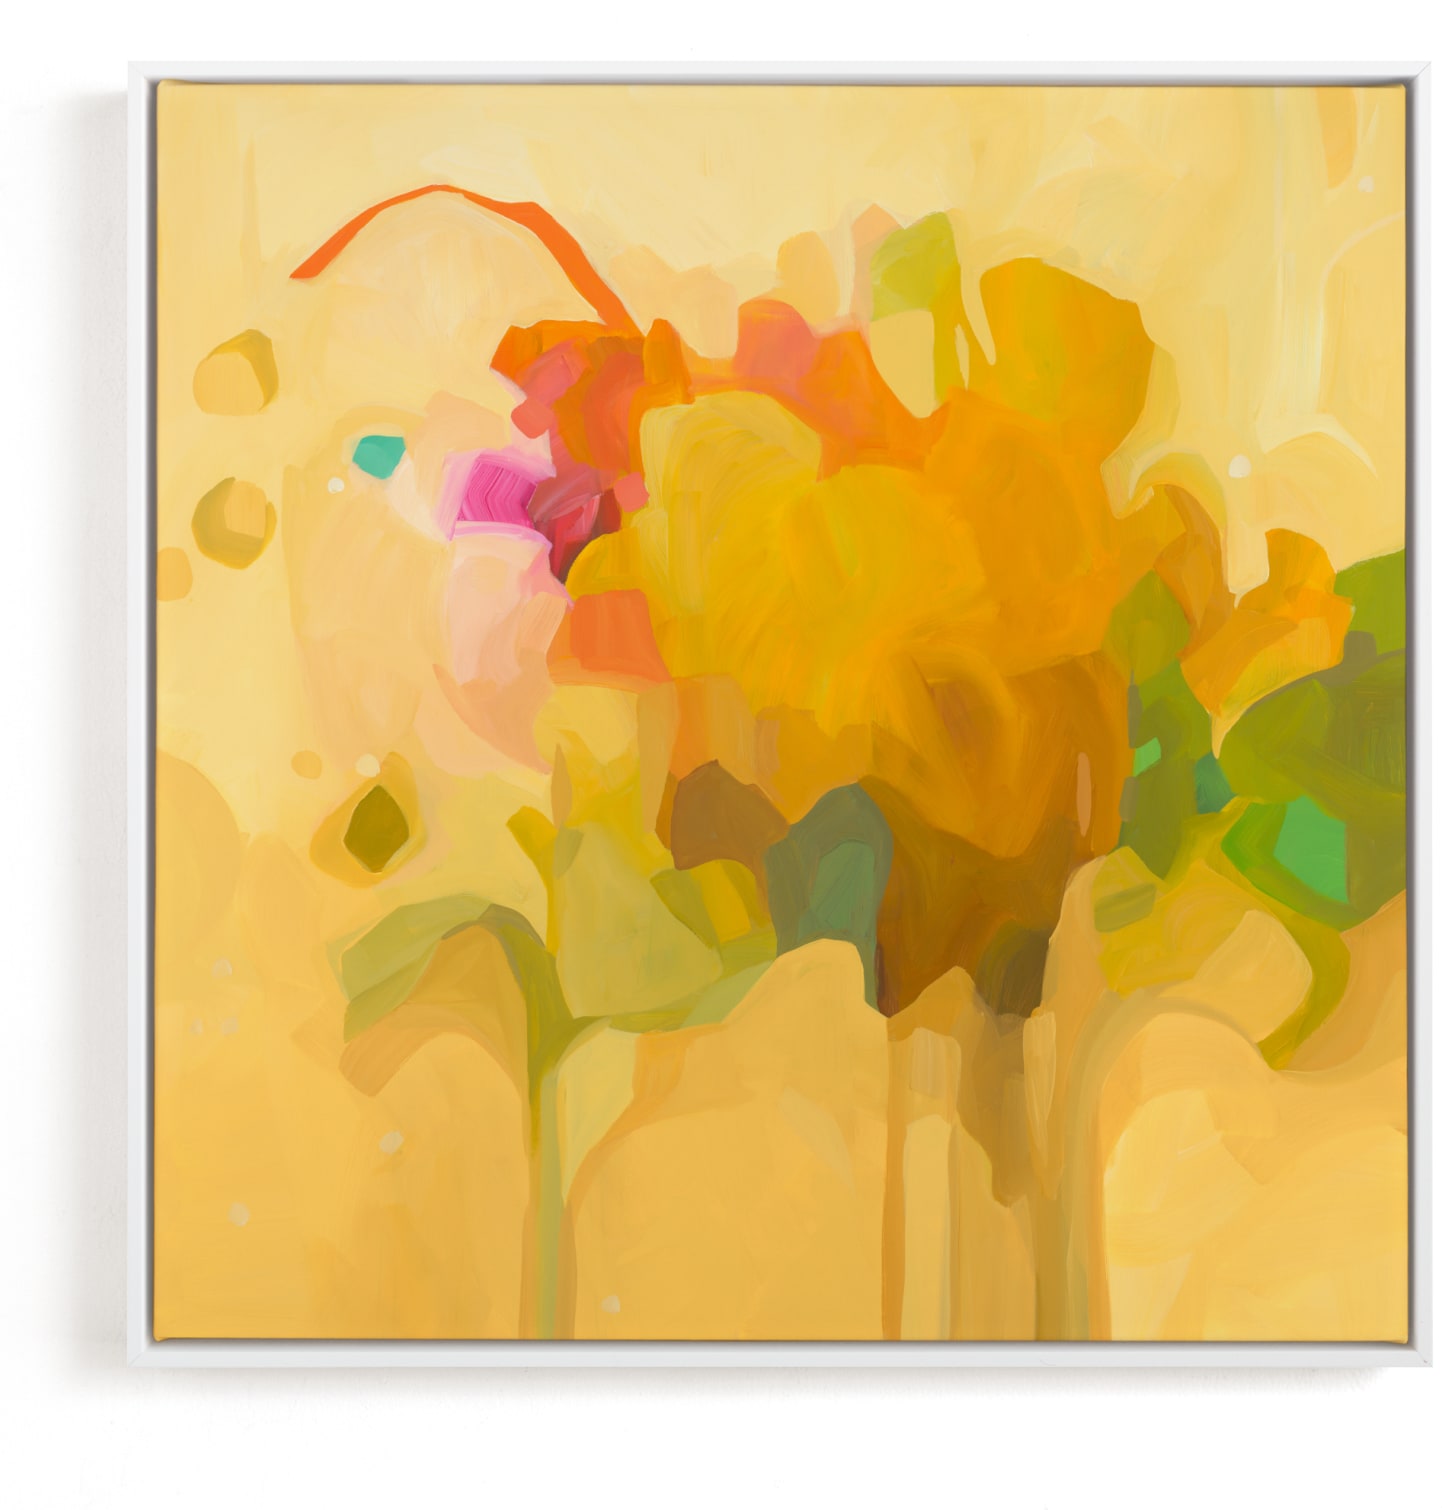 This is a yellow art by Susannah Bleasby called Sweetest Honey.